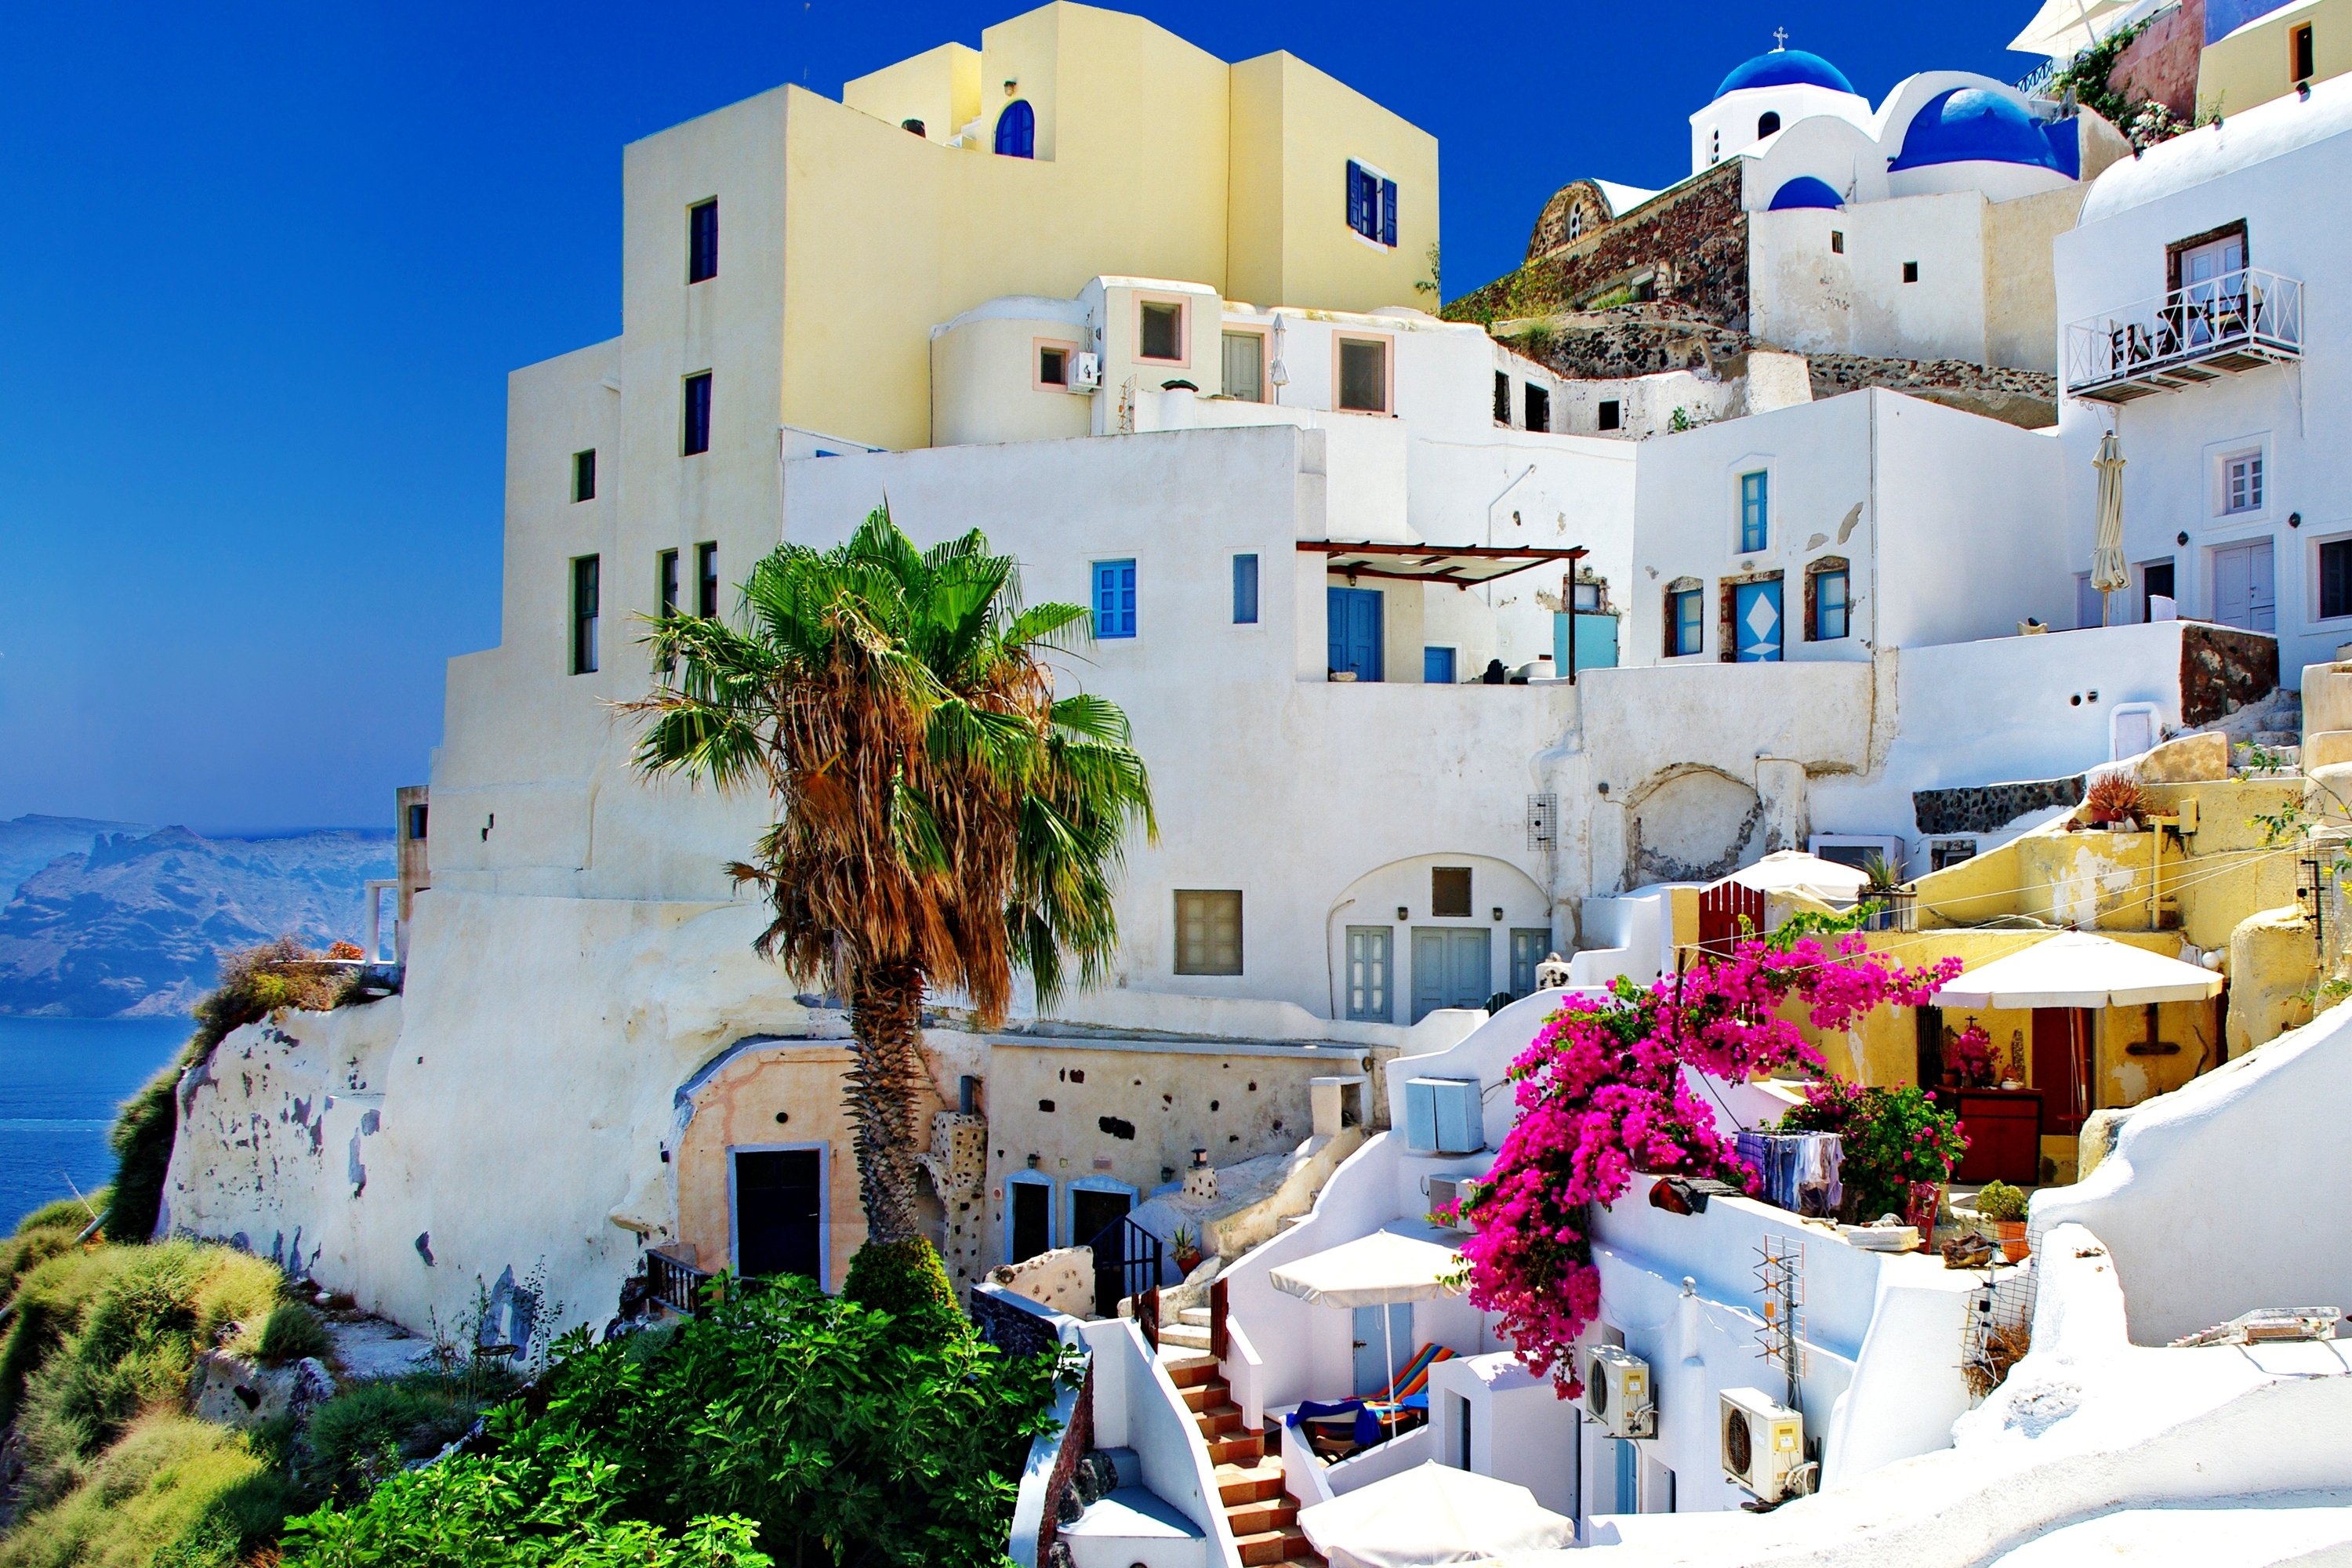 town, architecture, santorini, man made, building, greece, towns